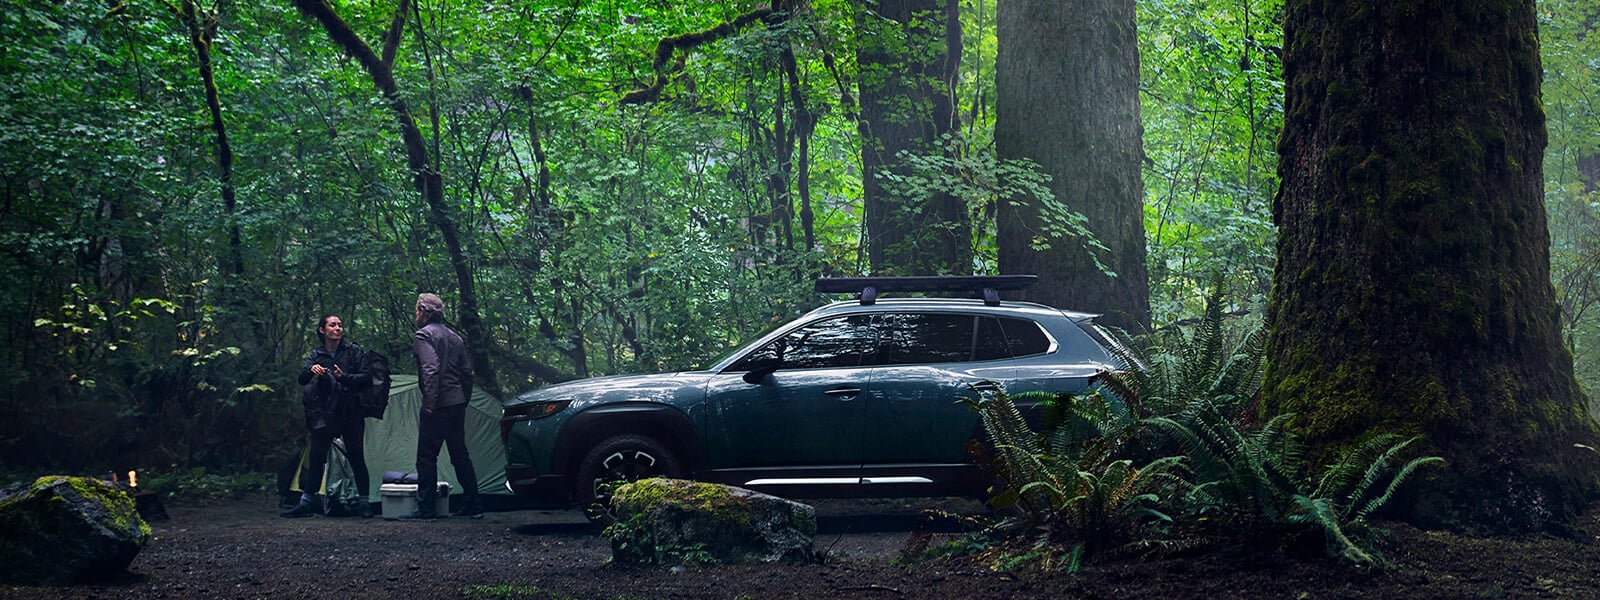 Couple talk between tent and parked Mazda CX-50 amid lush forest foliage and tree trunks.